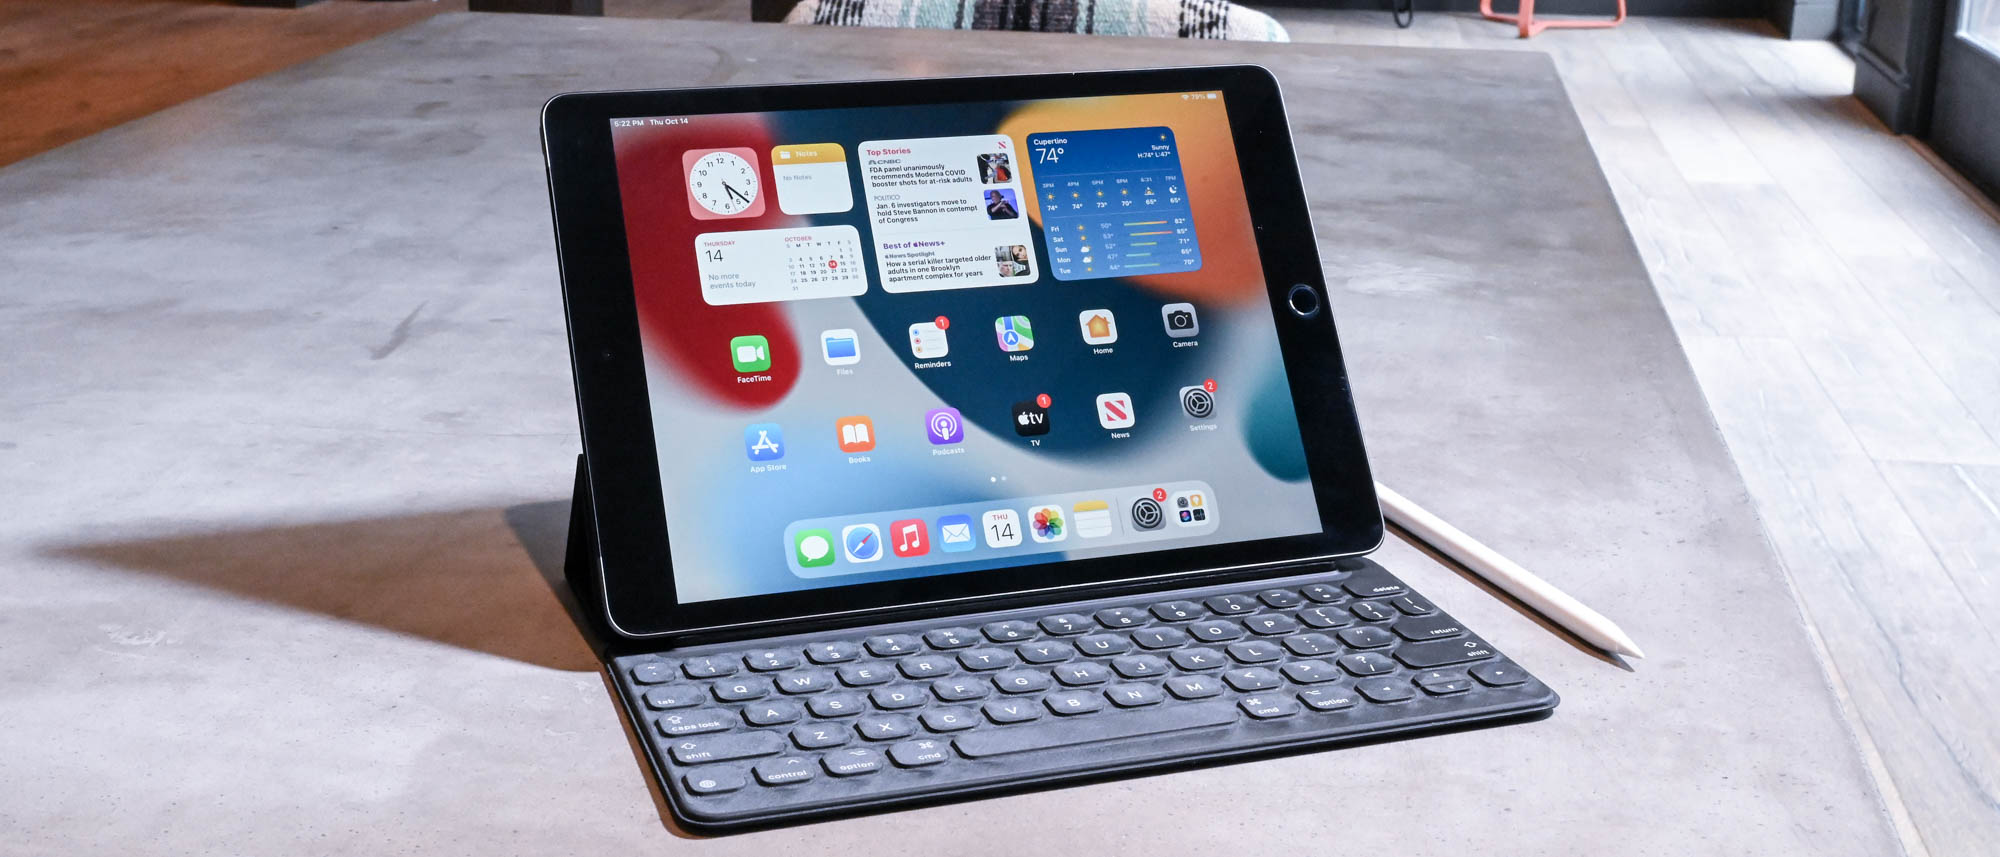 Review: The 10.2-inch iPad is more of the same, and that's not a bad thing